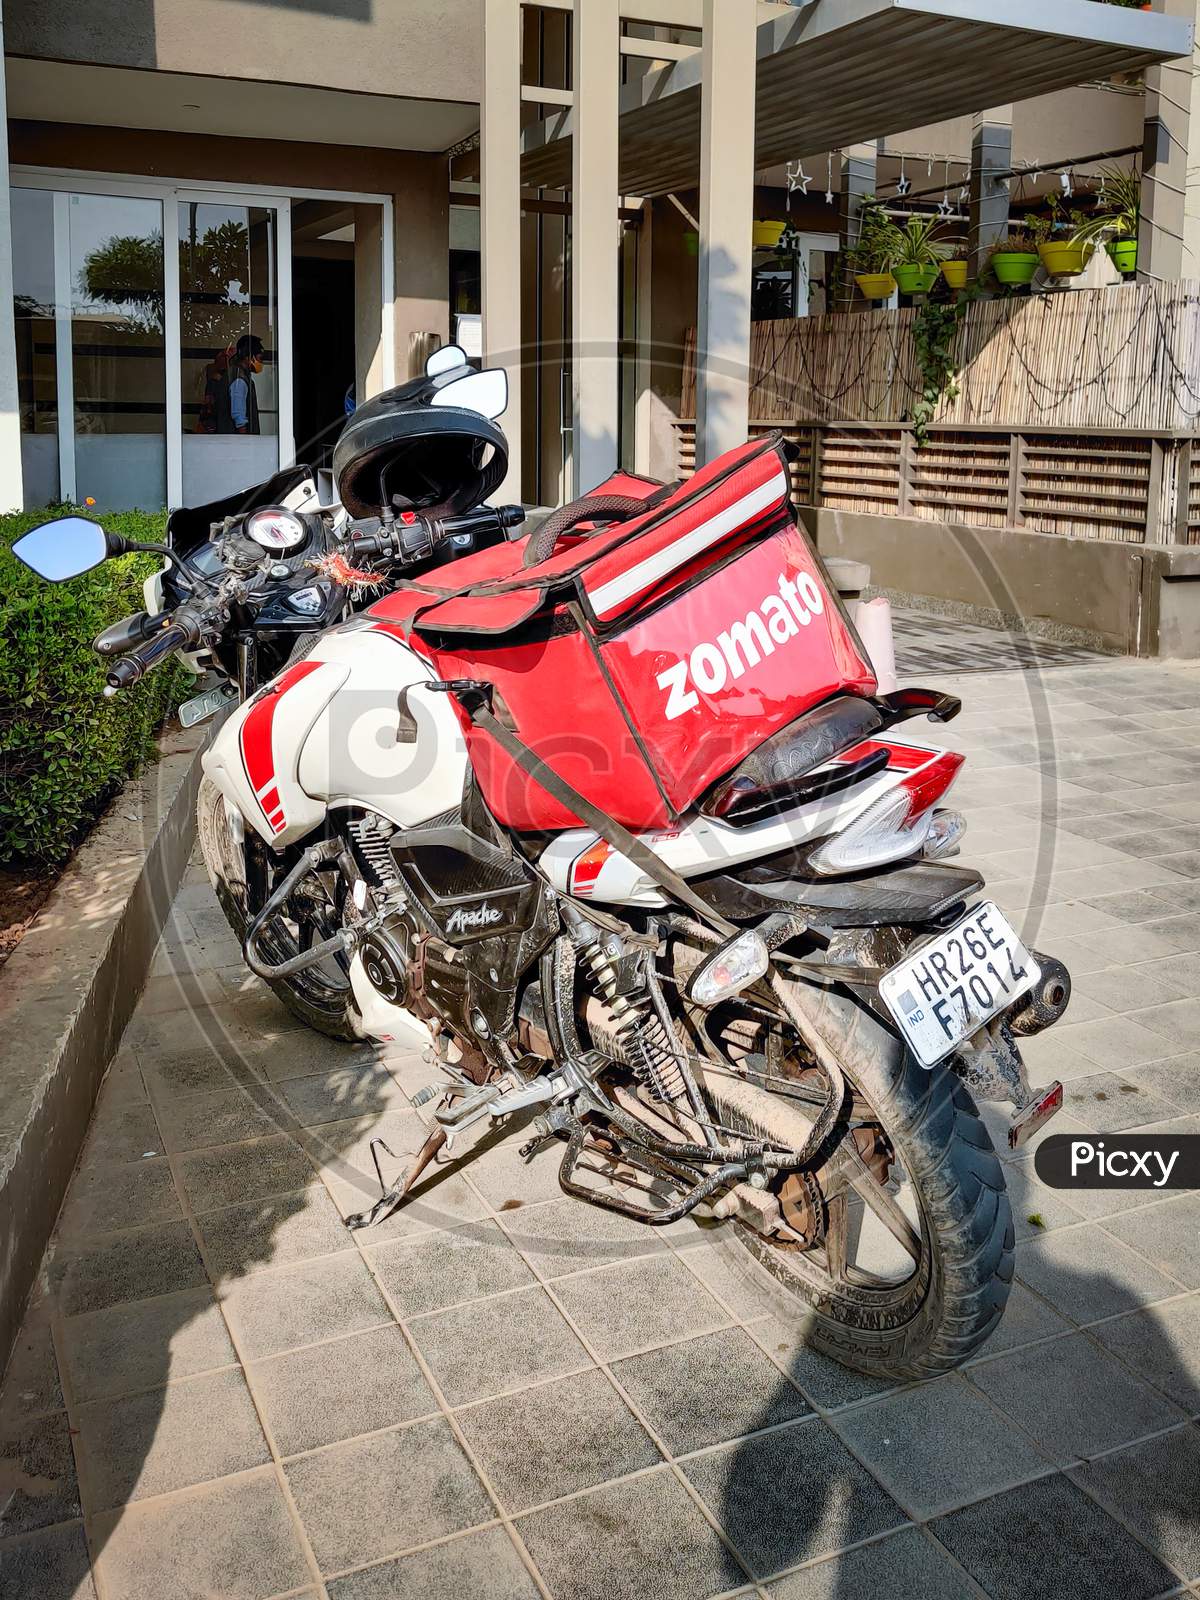 Motorcycle Rider With Red Zomato Bag Delivering Food To A Urban Complex For The Fast Growing Food Tech Startup Unicorn